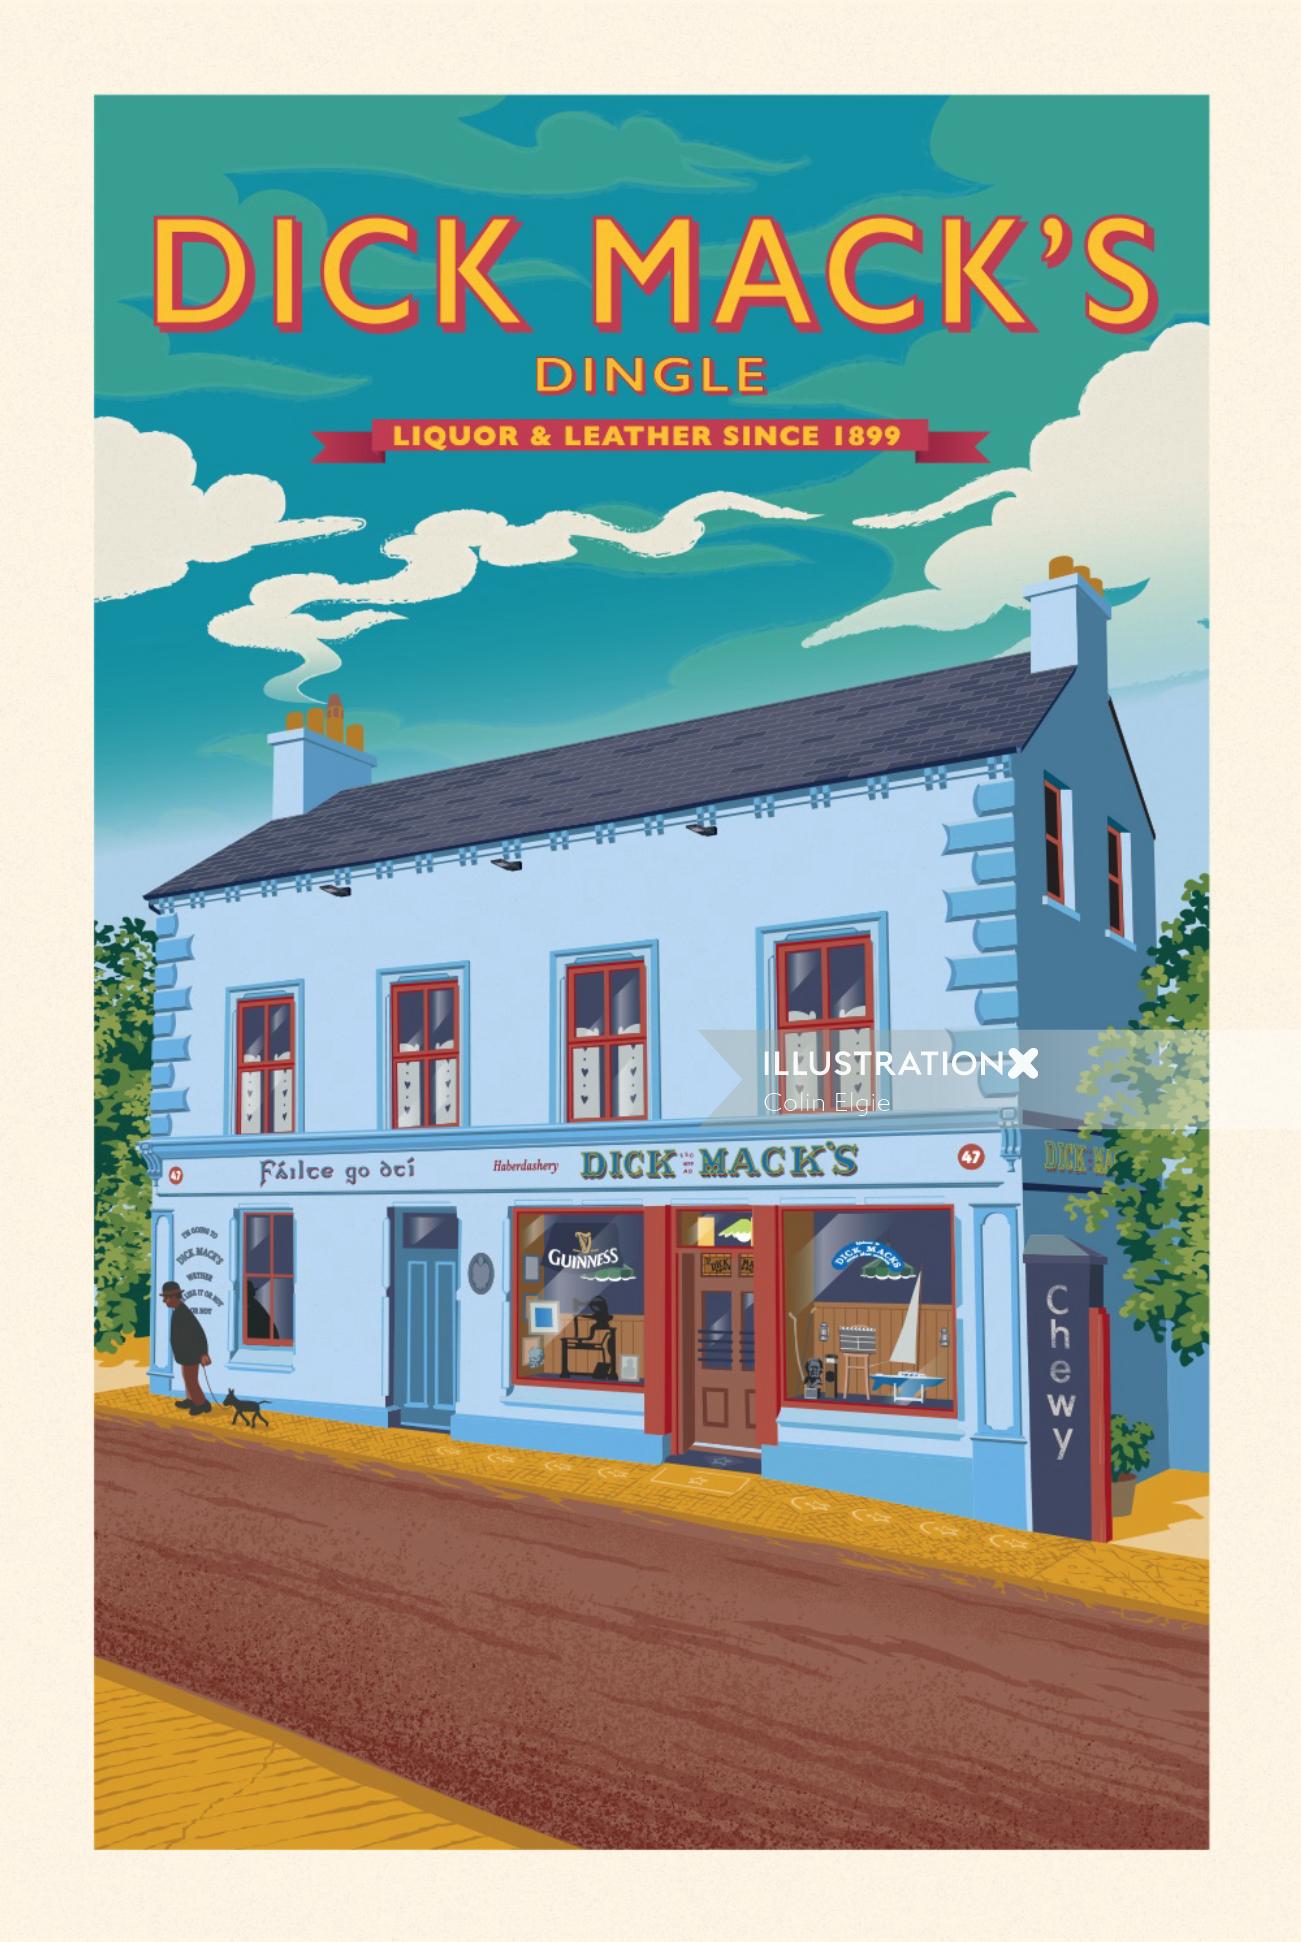 Poster illustration showing a famous old pub in Dingle